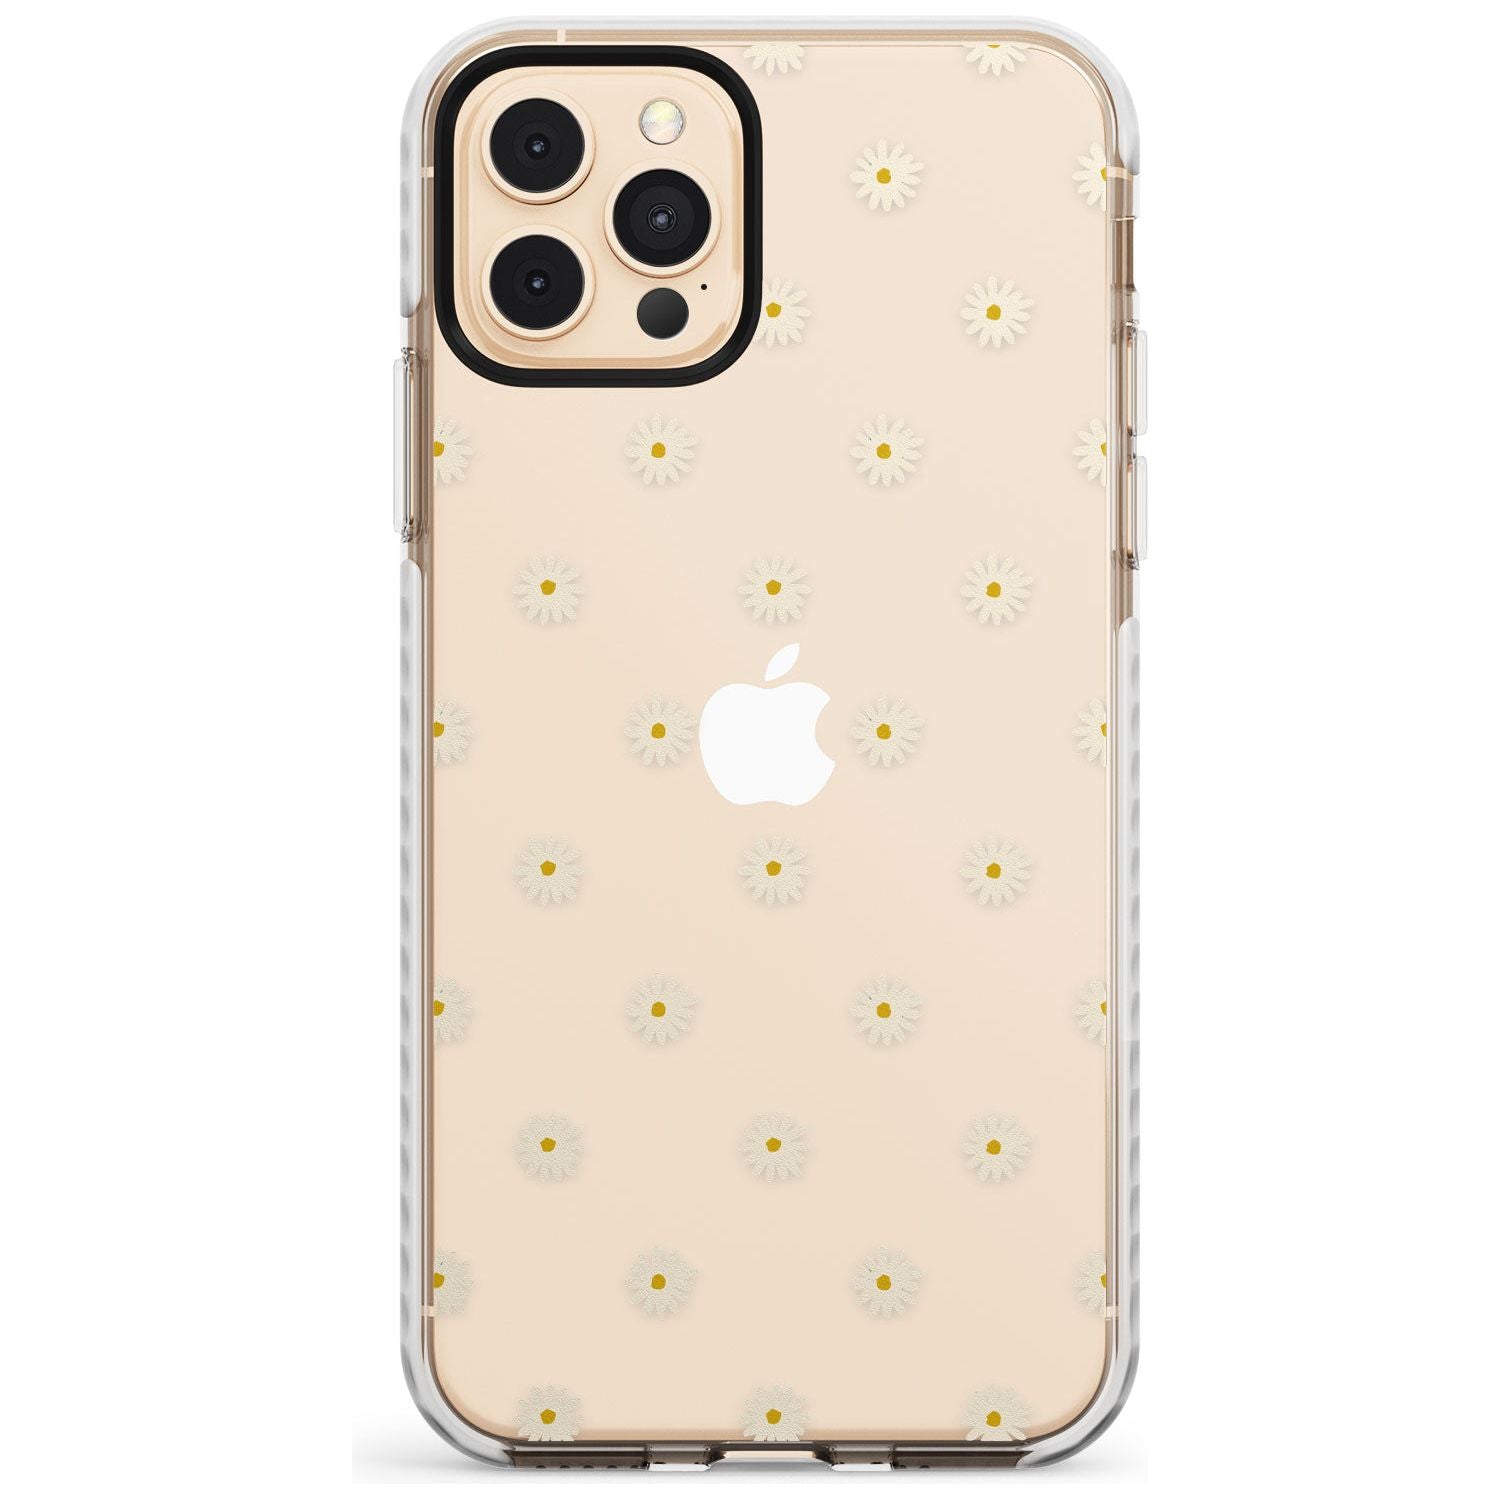 Daisy Pattern - Clear  Cute Floral Design Slim TPU Phone Case for iPhone 11 Pro Max